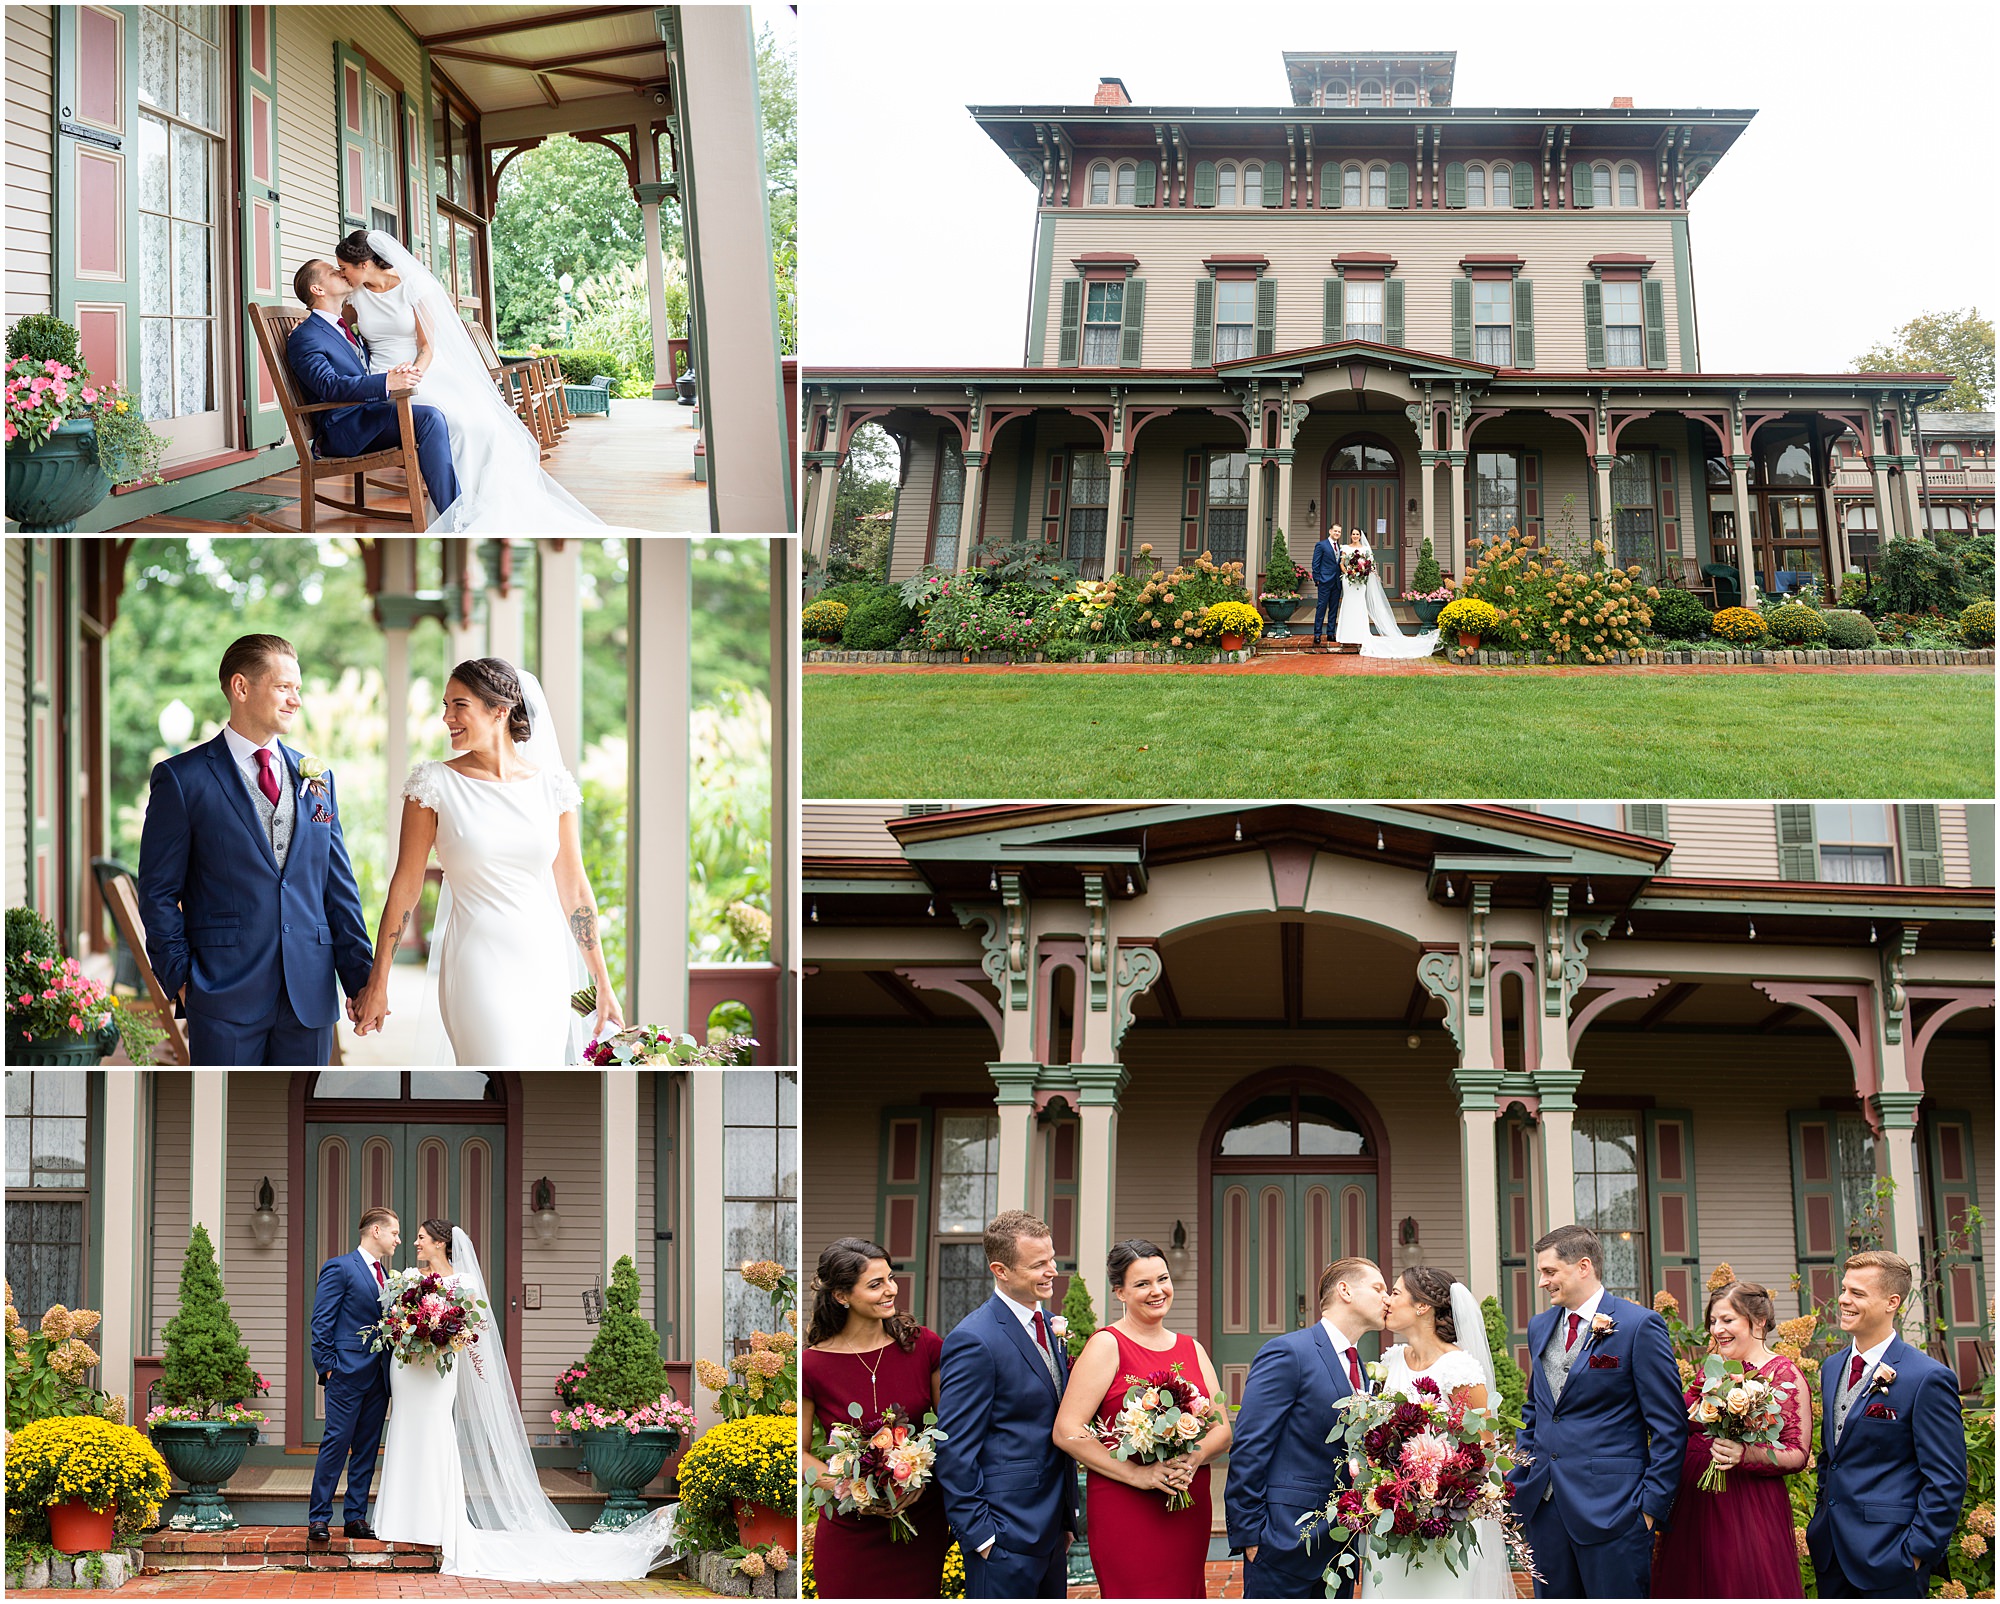 Best Wedding Venues in Cape May: The Southern Mansion Portraits